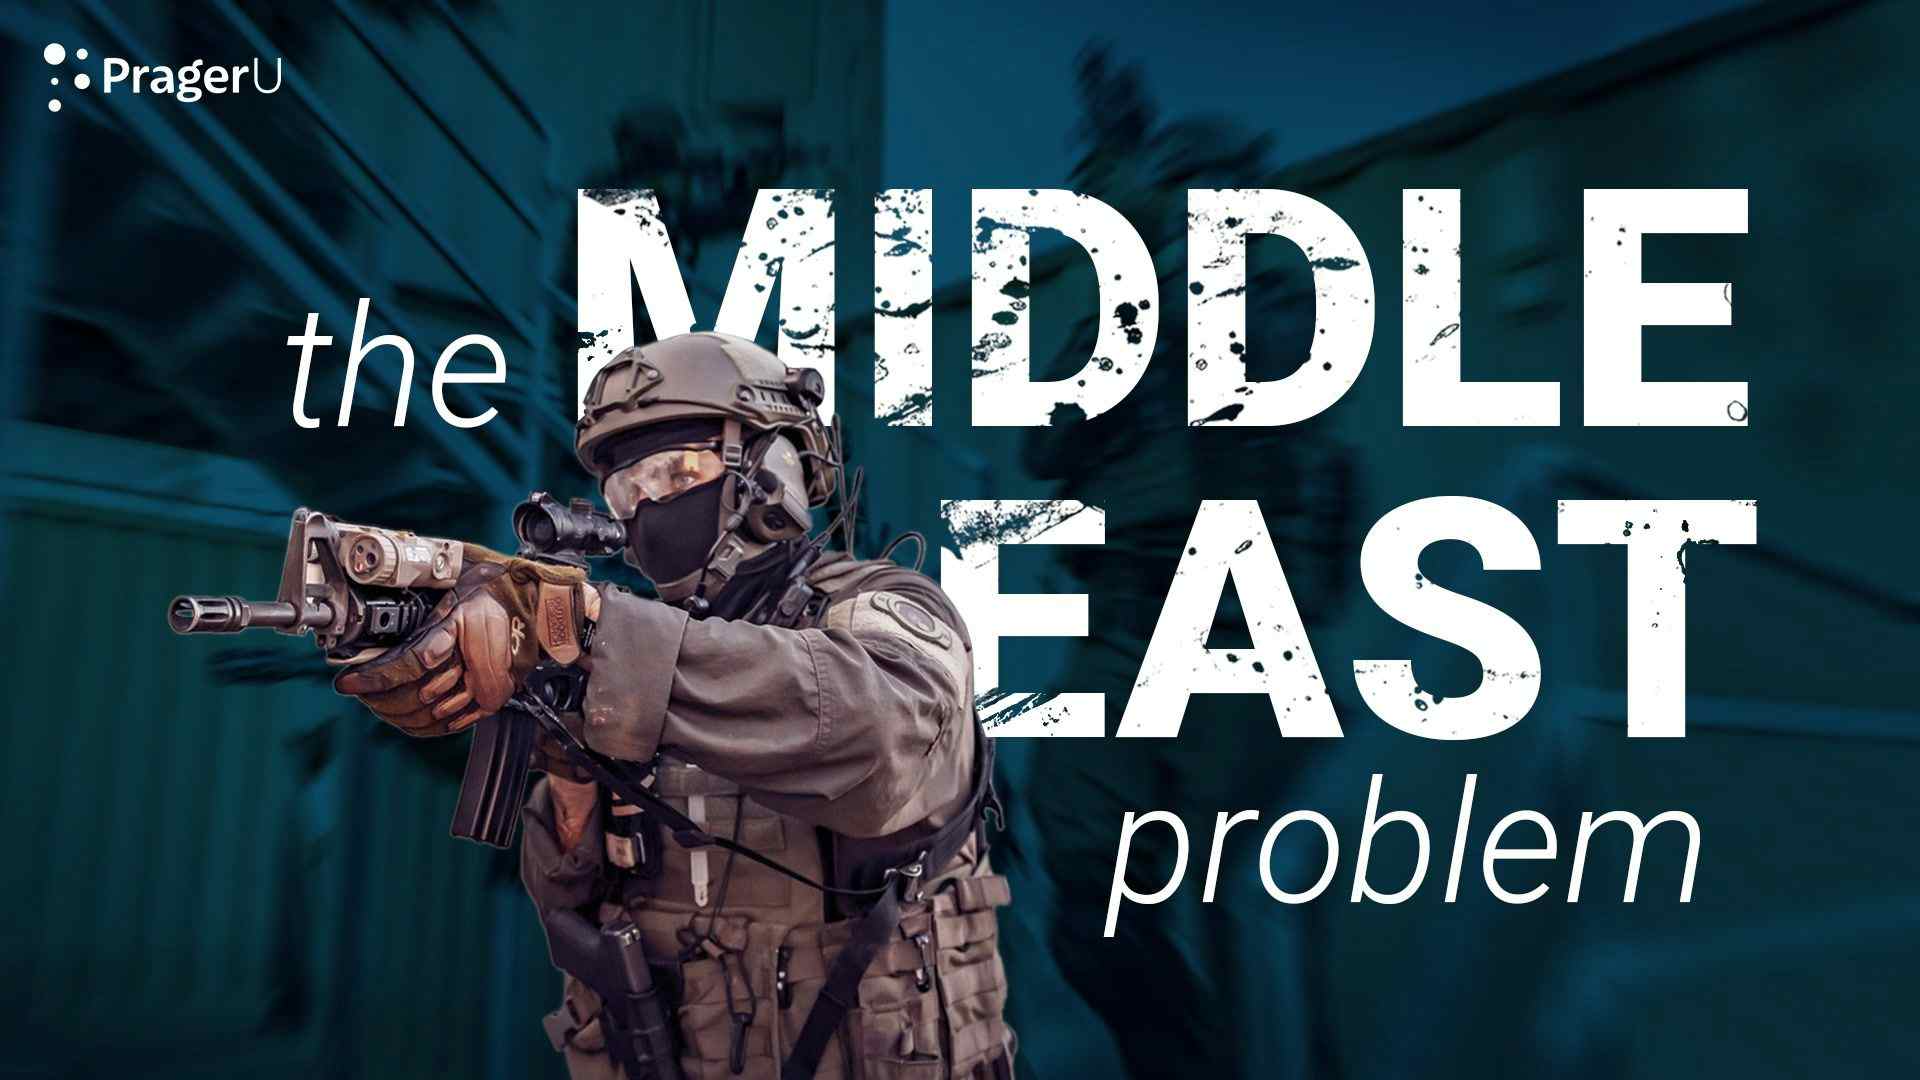 The Middle East Problem